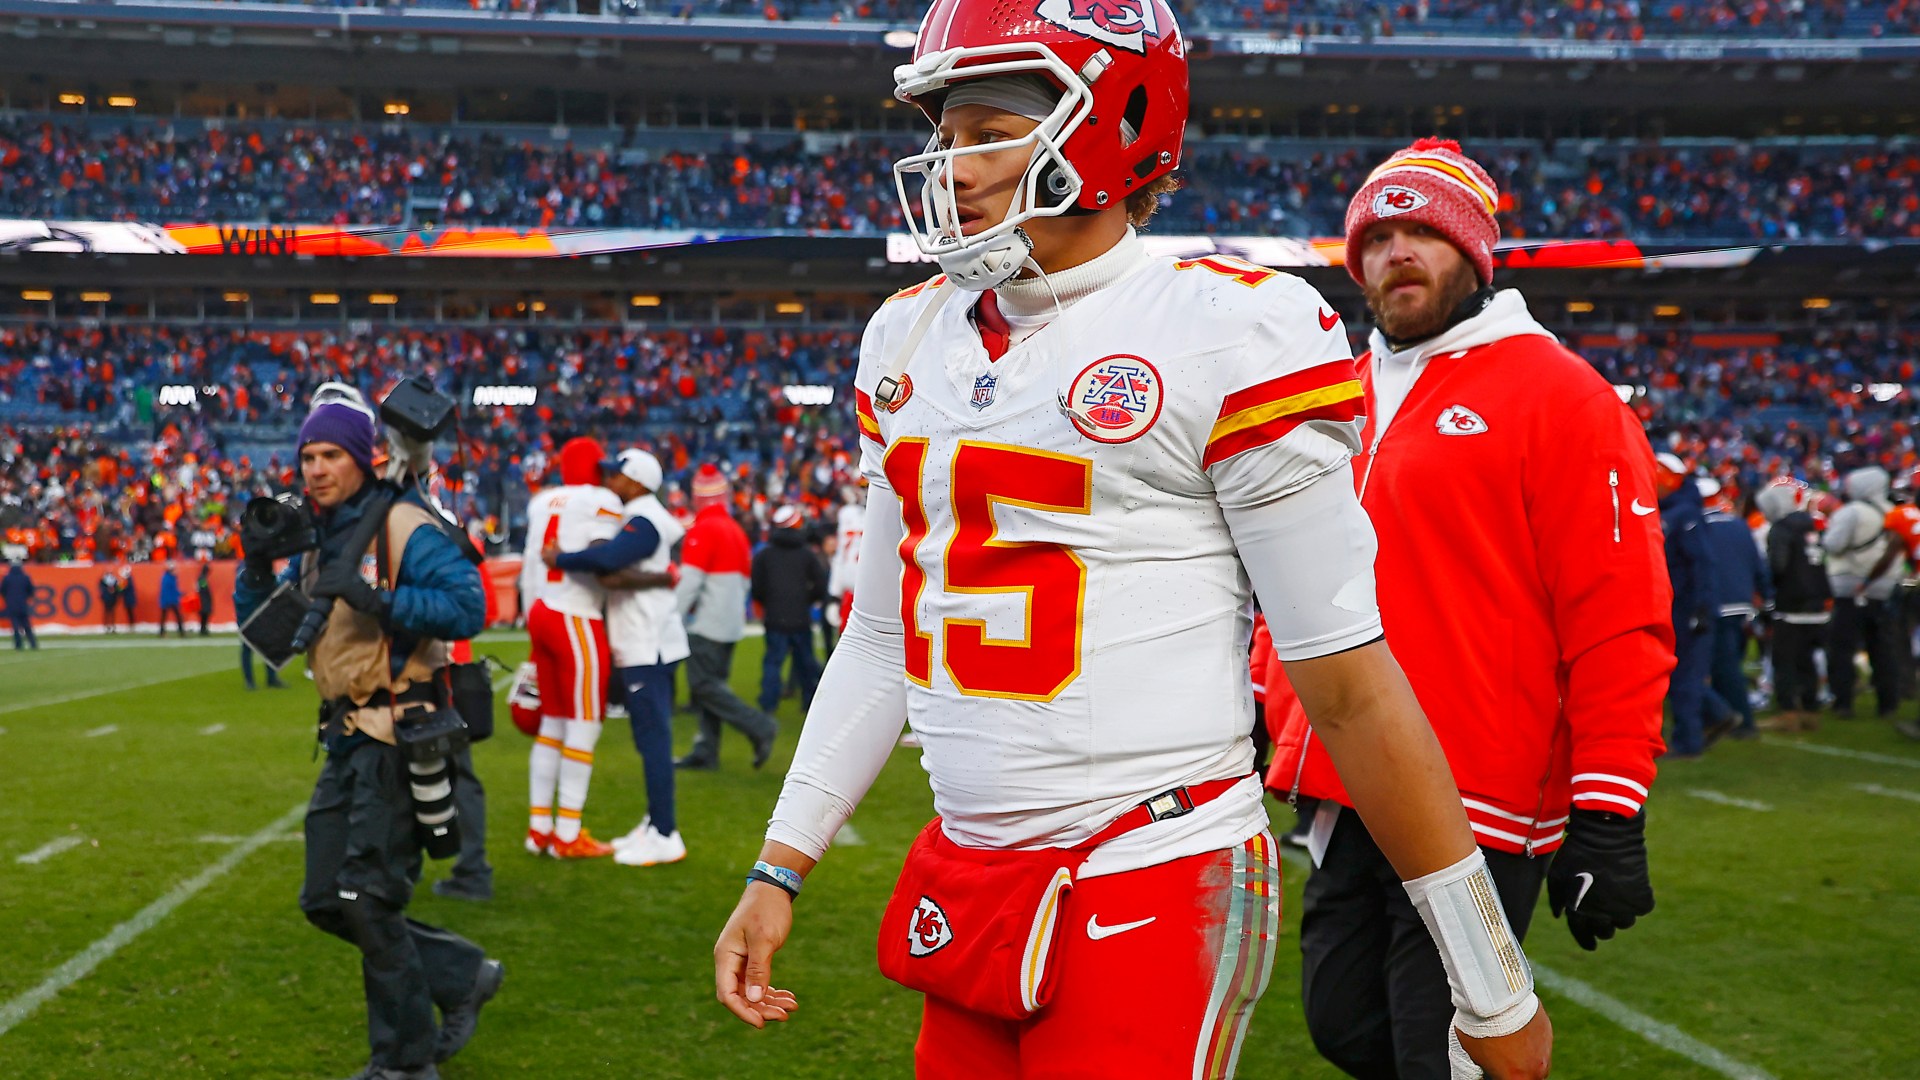 Broncos celebrate stopping Patrick Mahomes making history by trolling Travis Kelce with Taylor Swift song